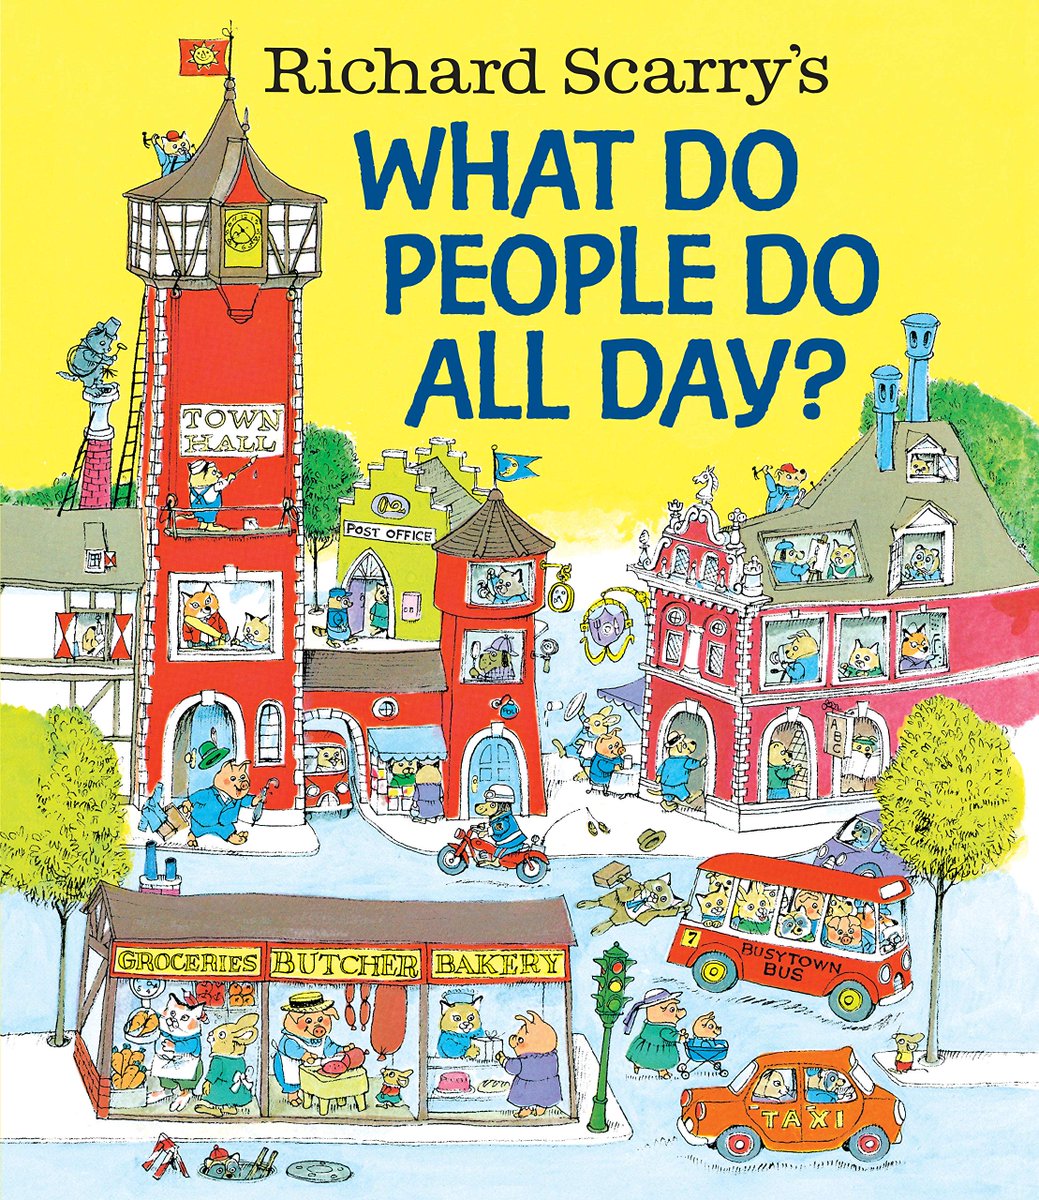 There are two types of people: those who grew up reading Richard Scarry, and those who remain perpetually maladjusted to society Richard Scarry: a thread